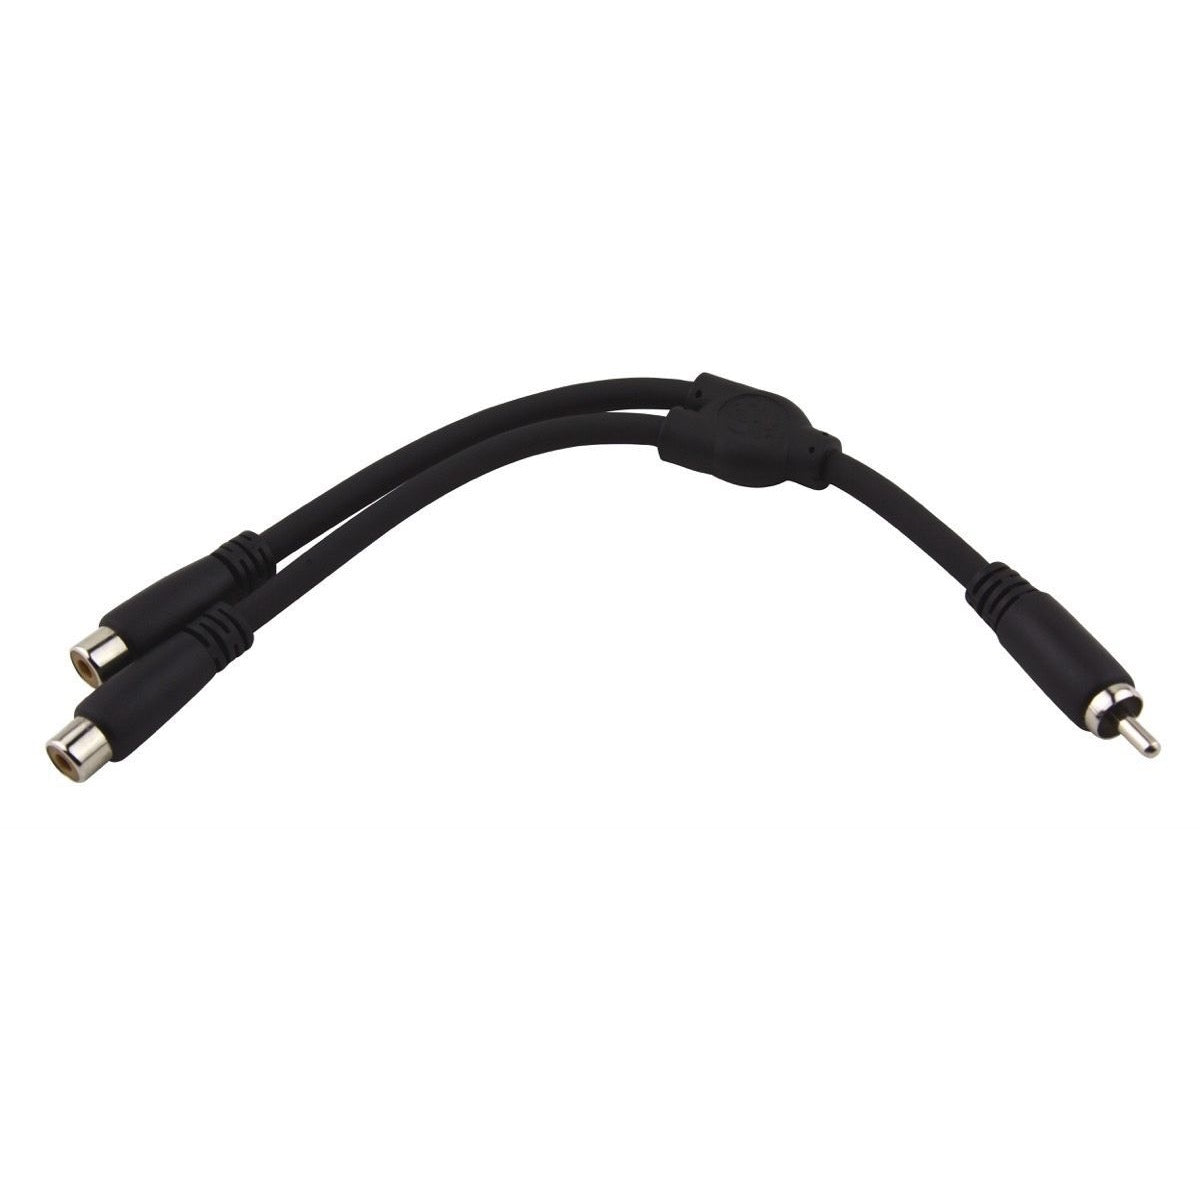 Pig Hog RCA Male to RCA Female Y-Cable, 6 Inch